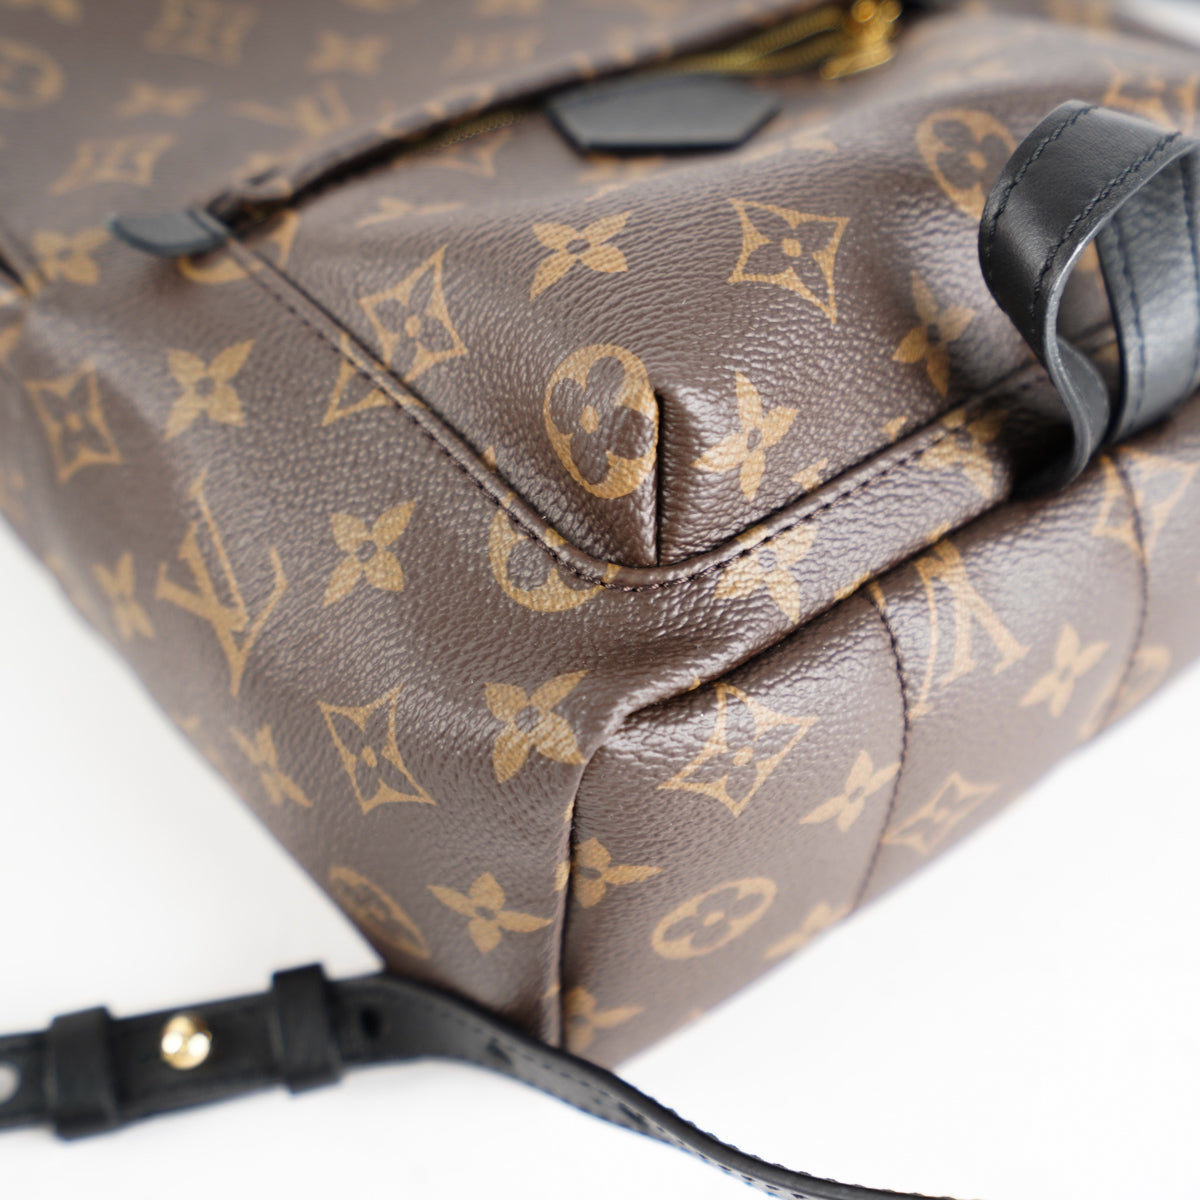 Louis Vuitton NEW M44874 Monogram Palm Springs MM Backpack – Empire Time NYC